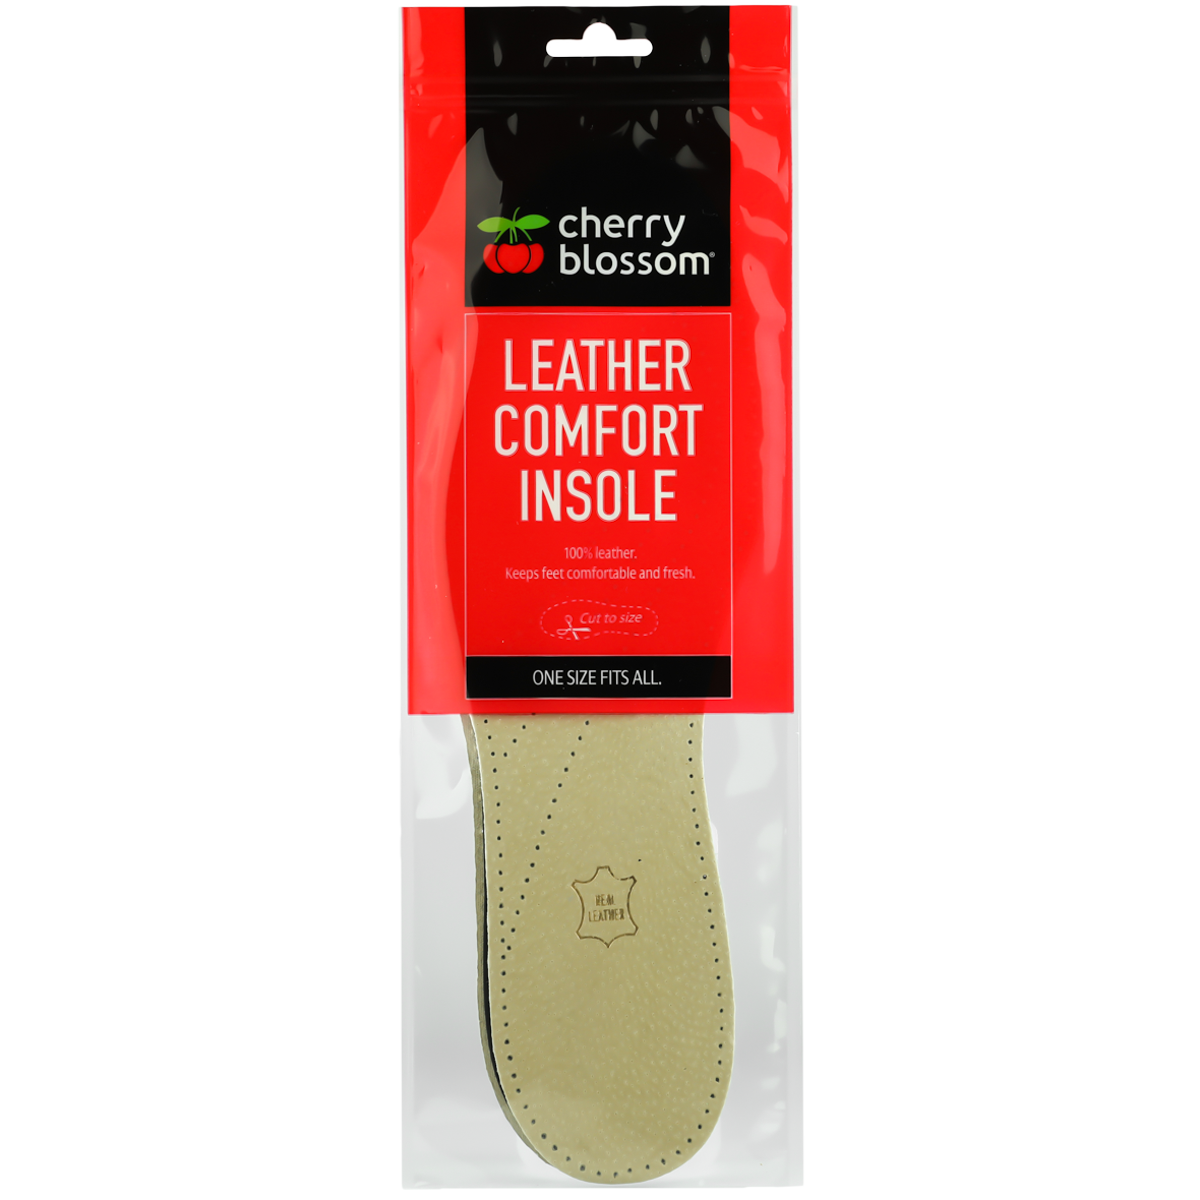 Leather Comfort Insole